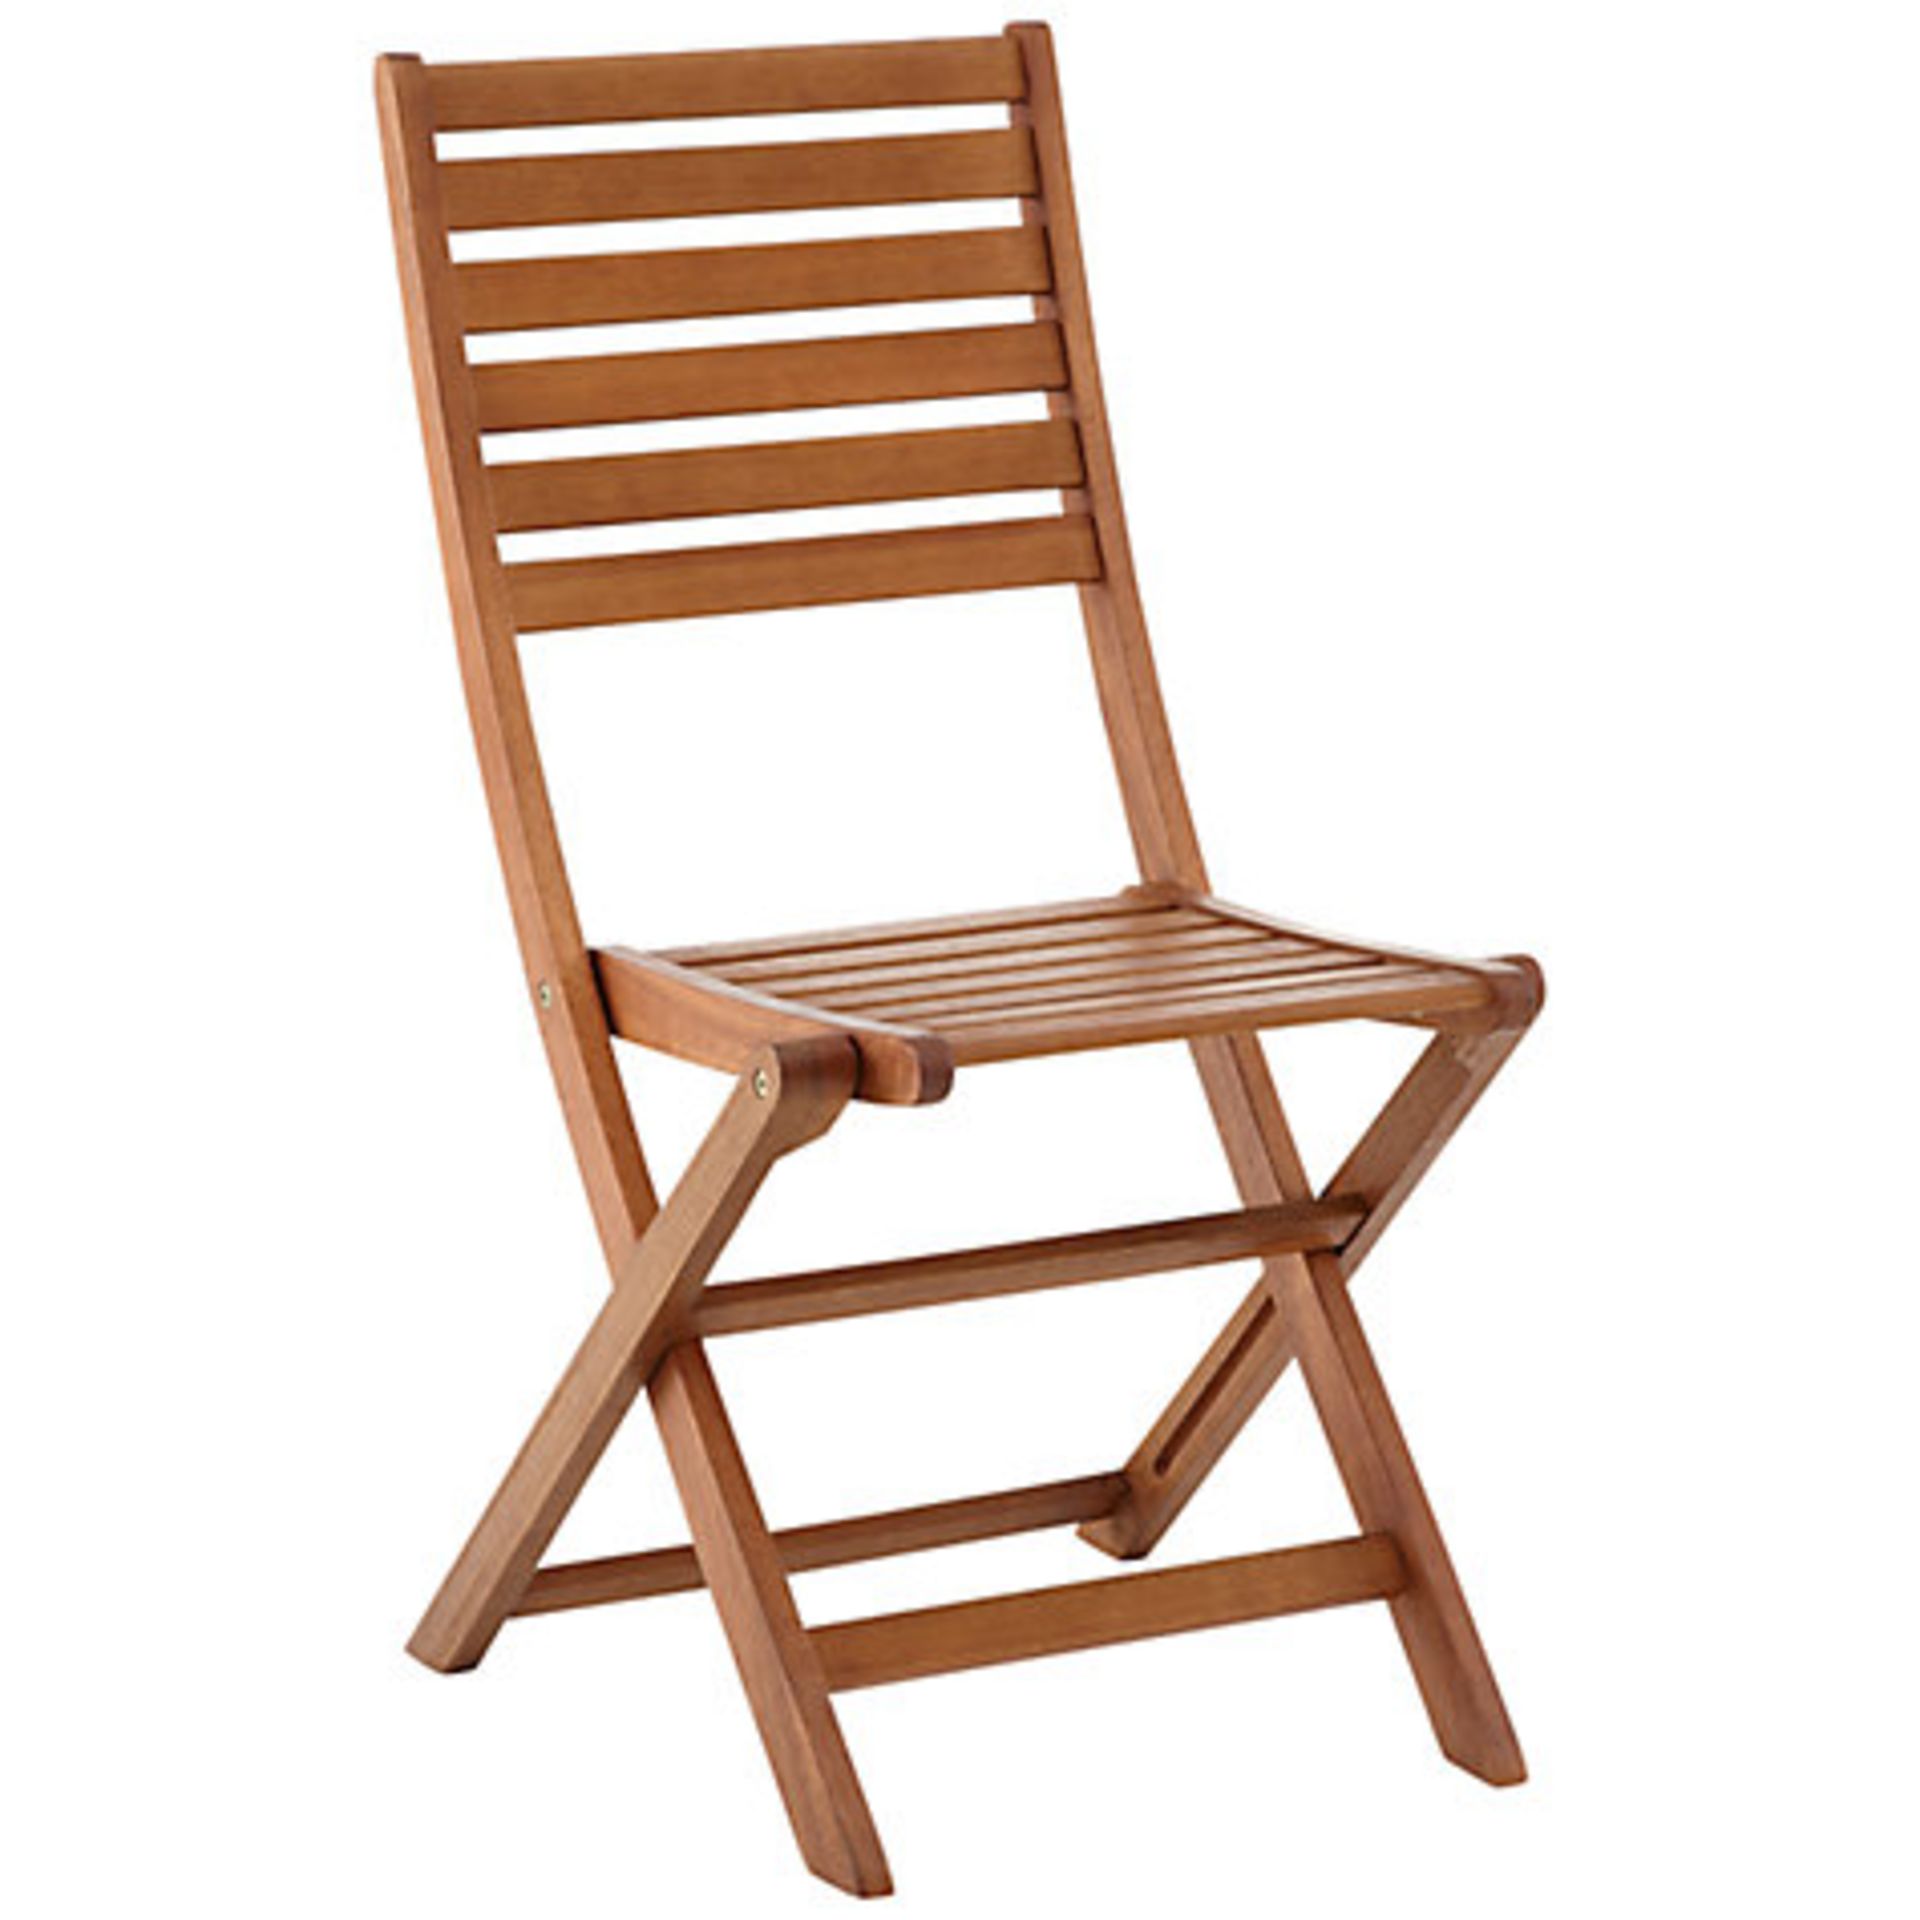 2 x BOXED JOHN LEWIS NAPLES FOLDING ARM CHAIRS RRP £135 (194683)  *PLEASE NOTE THAT THE BID PRICE IS